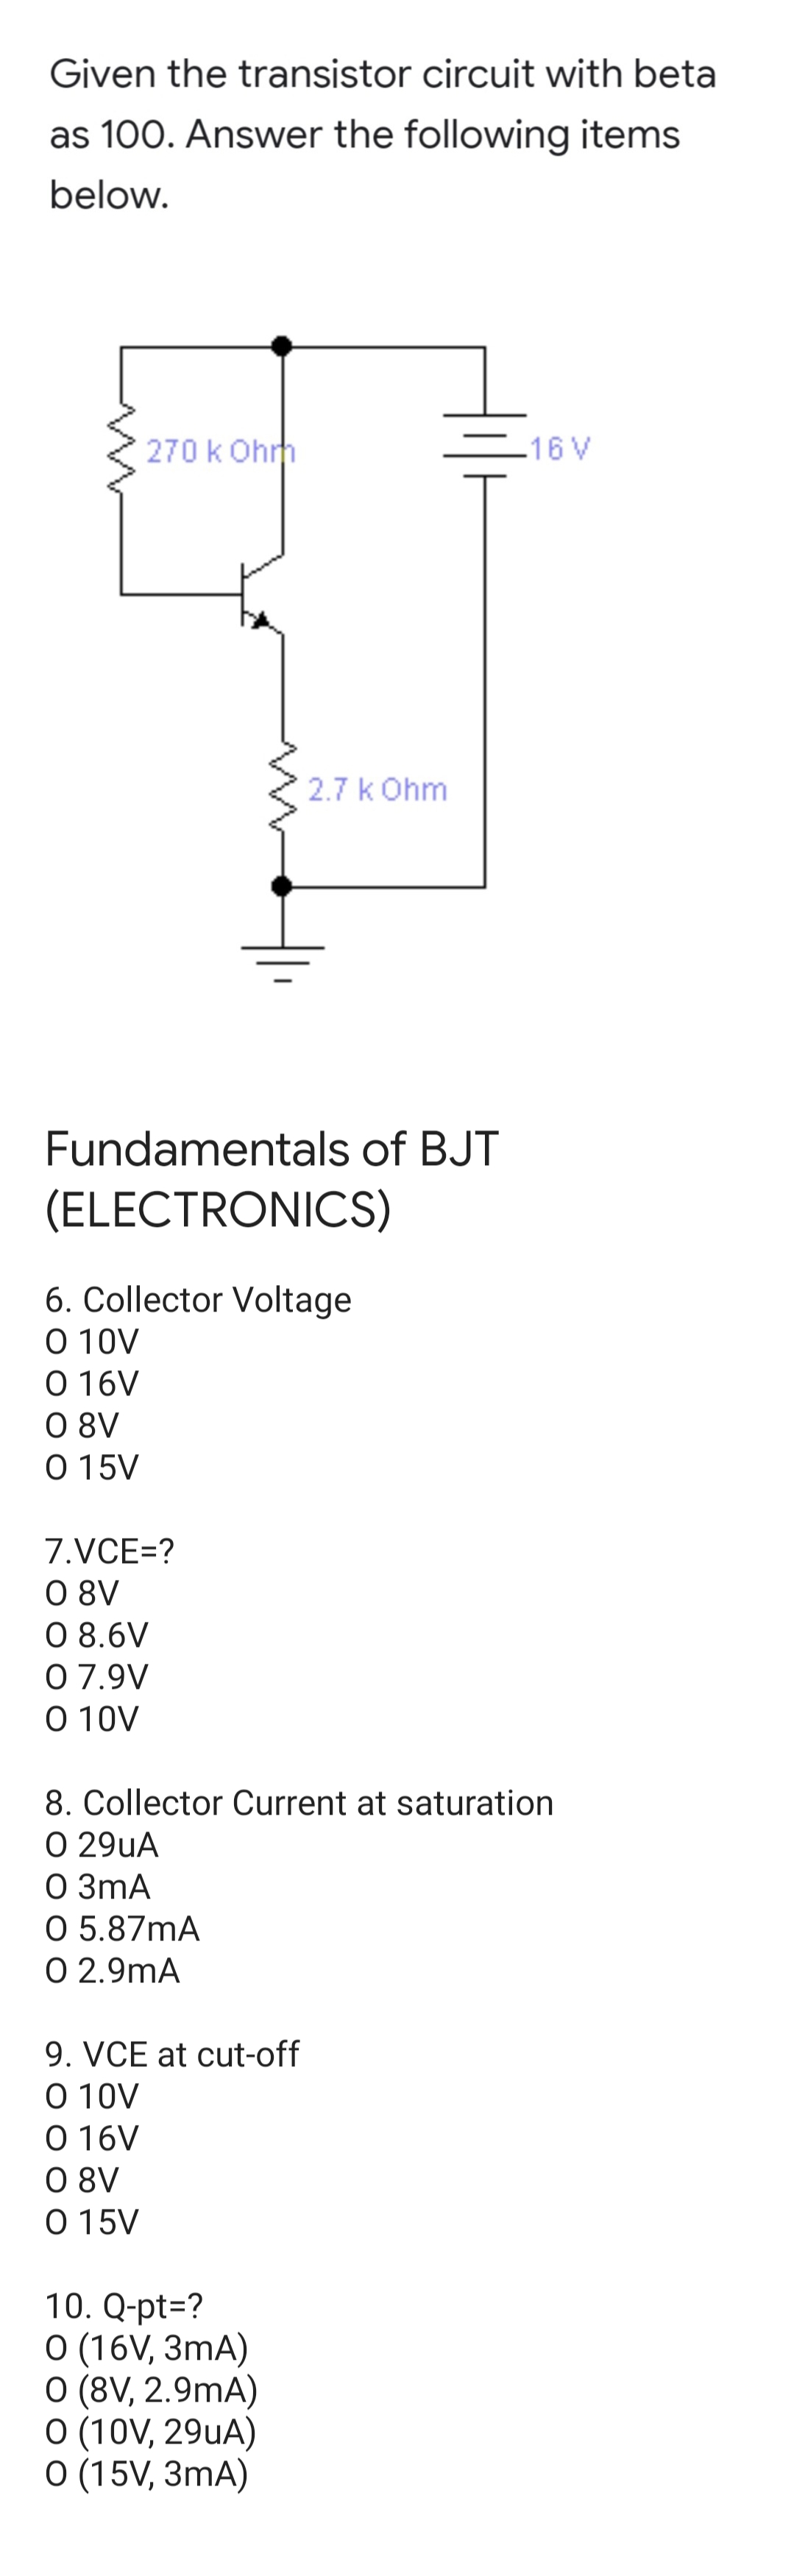 Given the transistor circuit with beta
as 100. Answer the following items
below.
270 k Ohrh
-16 V
2.7 k Ohm
Fundamentals of BJT
(ELECTRONICS)
6. Collector Voltage
O 10V
O 16V
O 8V
O 15V
7.VCE=?
O 8V
0 8.6V
0 7.9V
O 10V
8. Collector Current at saturation
O 29uA
O 3mA
O 5.87mA
O 2.9mA
9. VCE at cut-off
O 10V
O 16V
O 8V
O 15V
10. Q-pt=?
О (16V, 3mA)
O (8V, 2.9mA)
O (10V, 29uA)
O (15V, 3mA)
